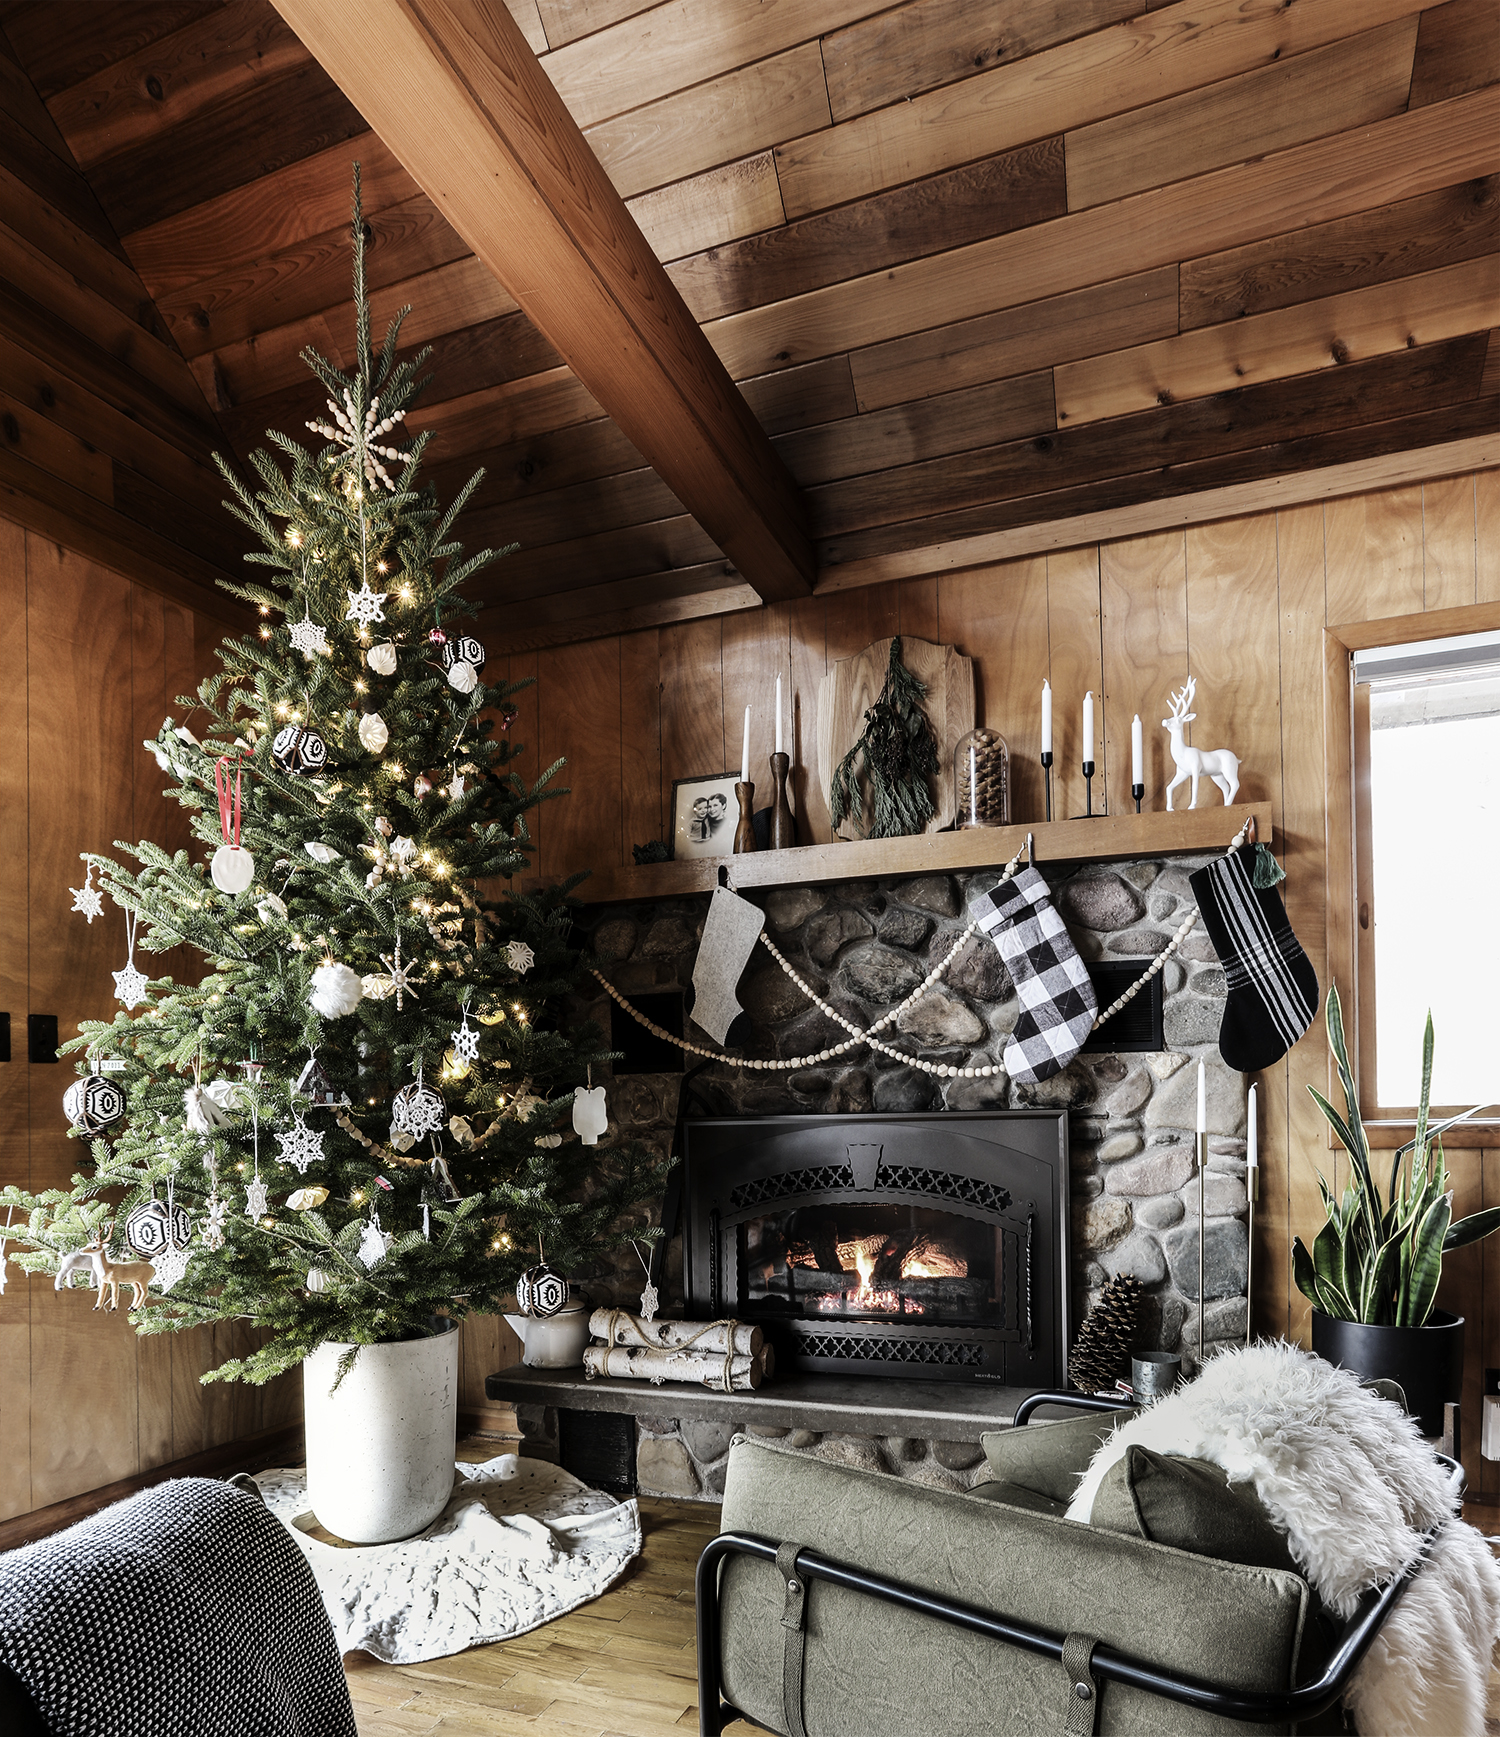 Winter at The Cabin Featured in Better Homes & Gardens